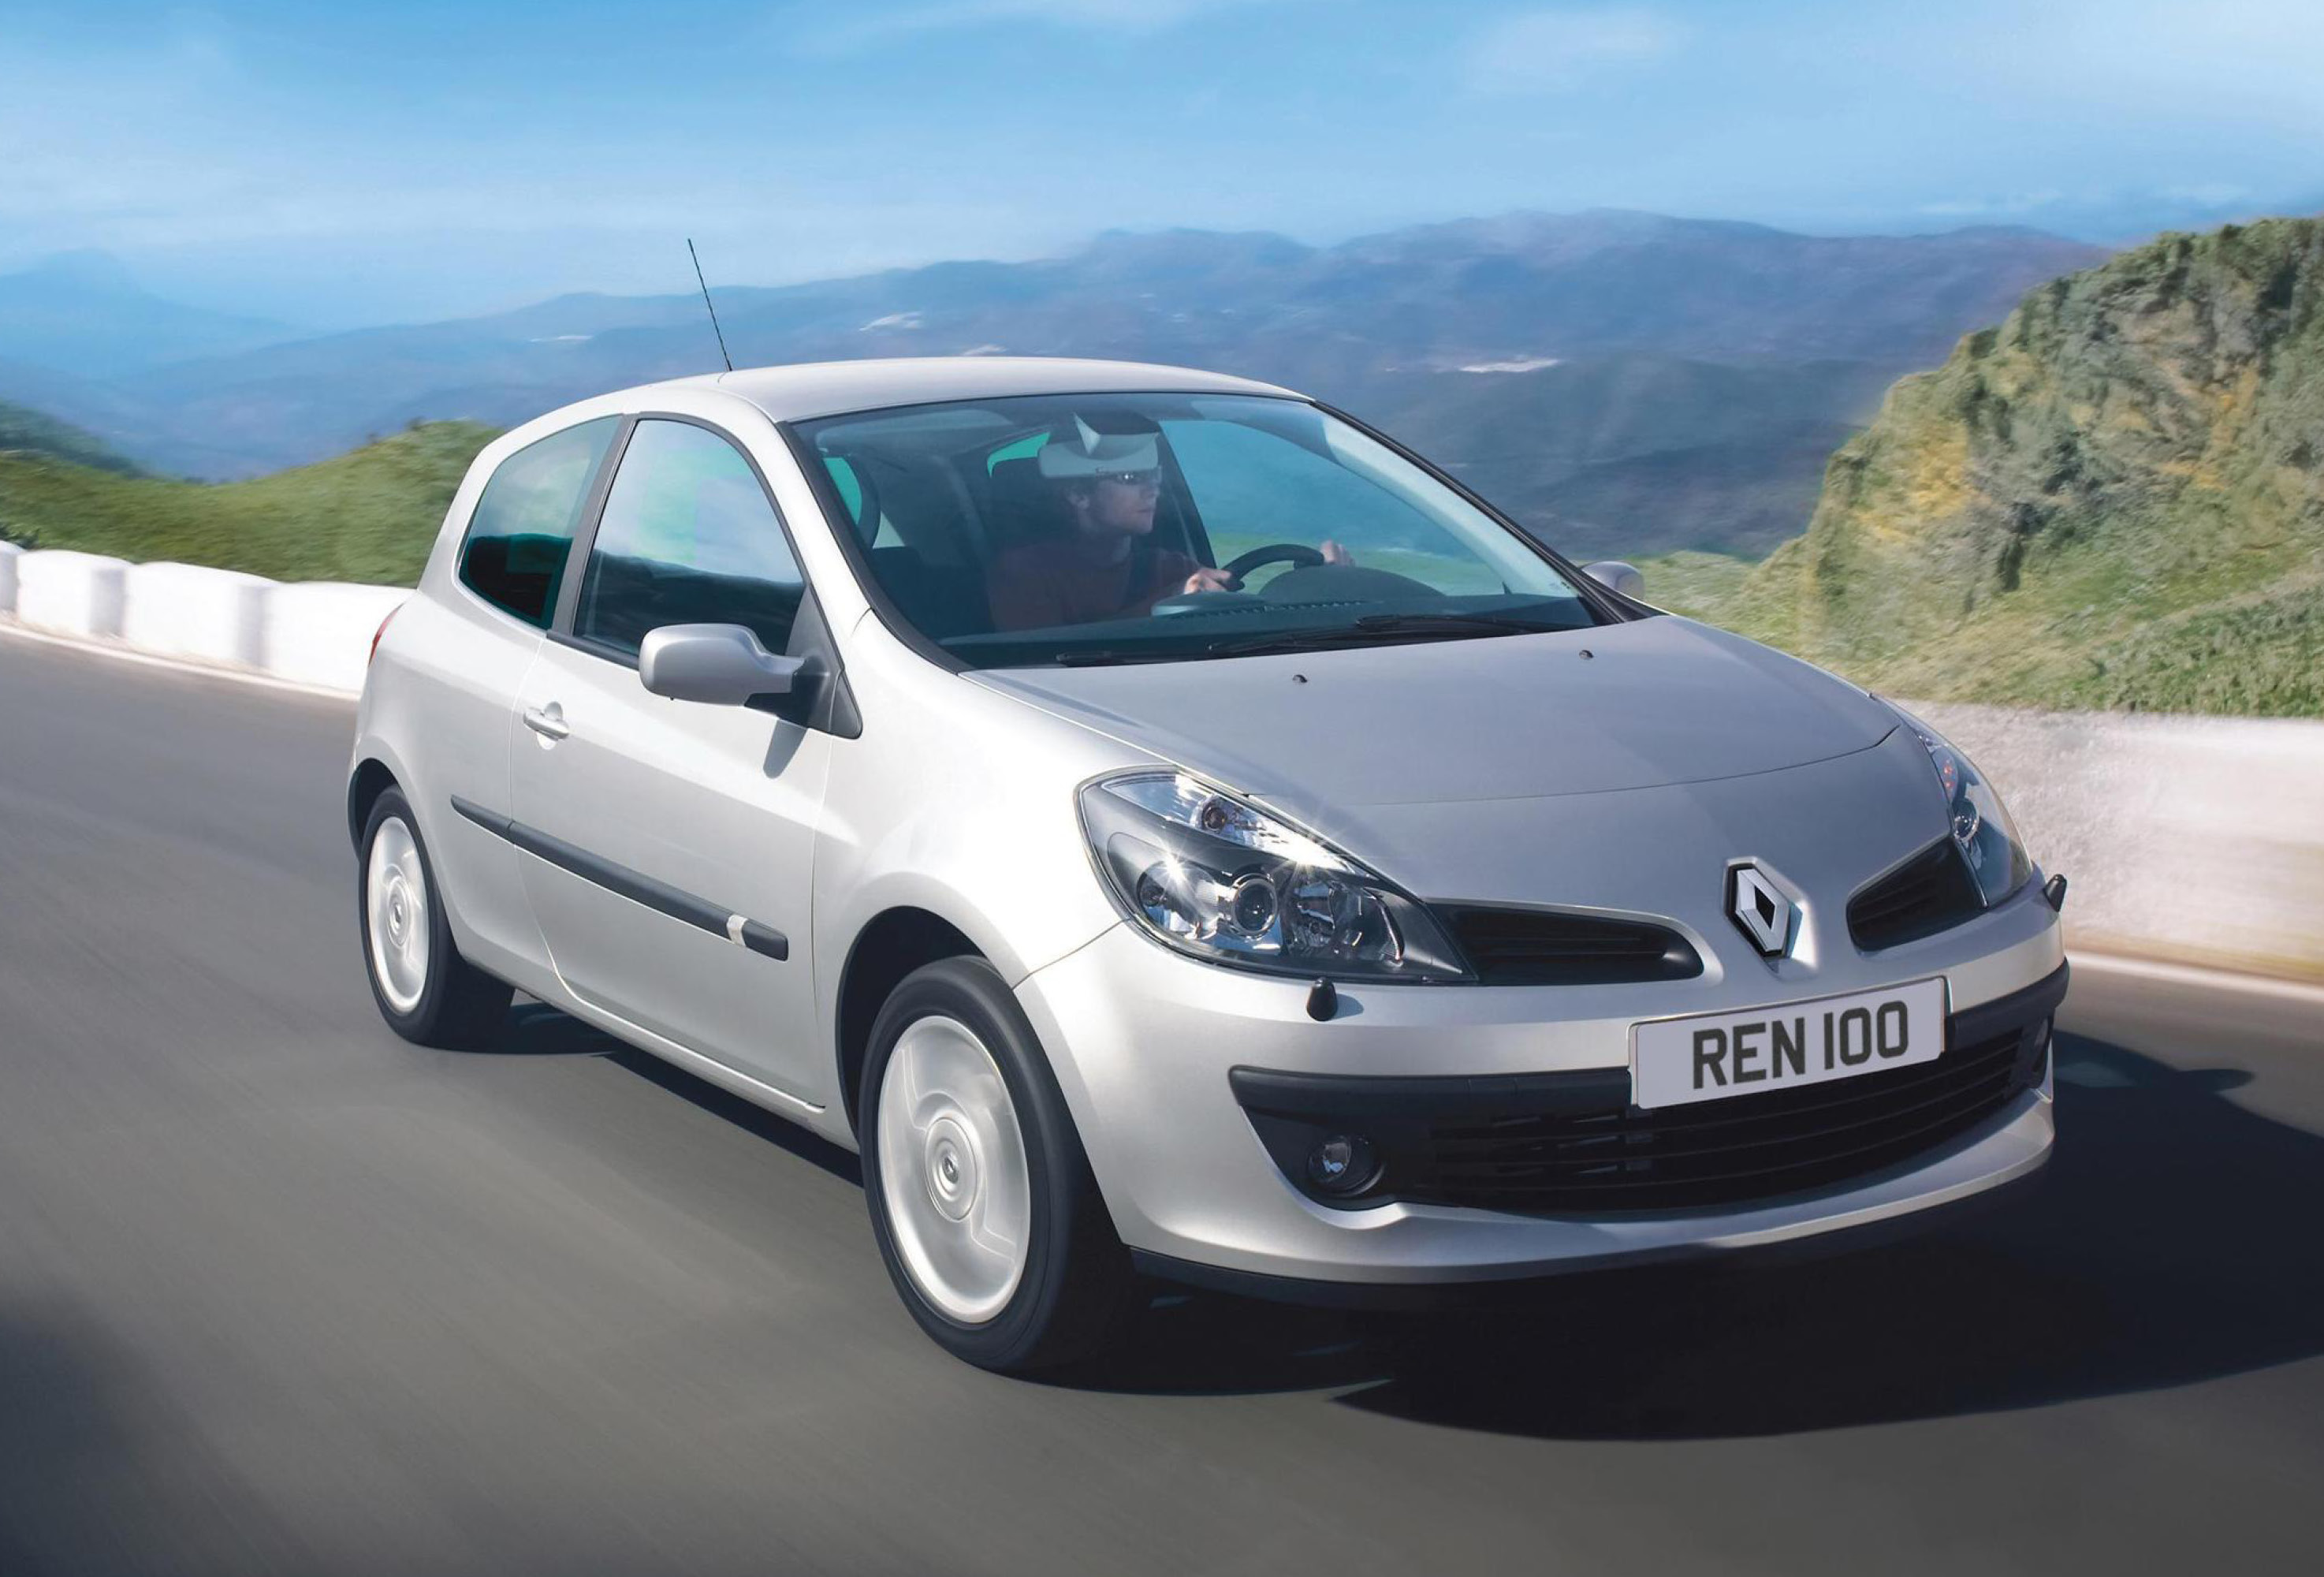 The Clio is great value and incredibly popular